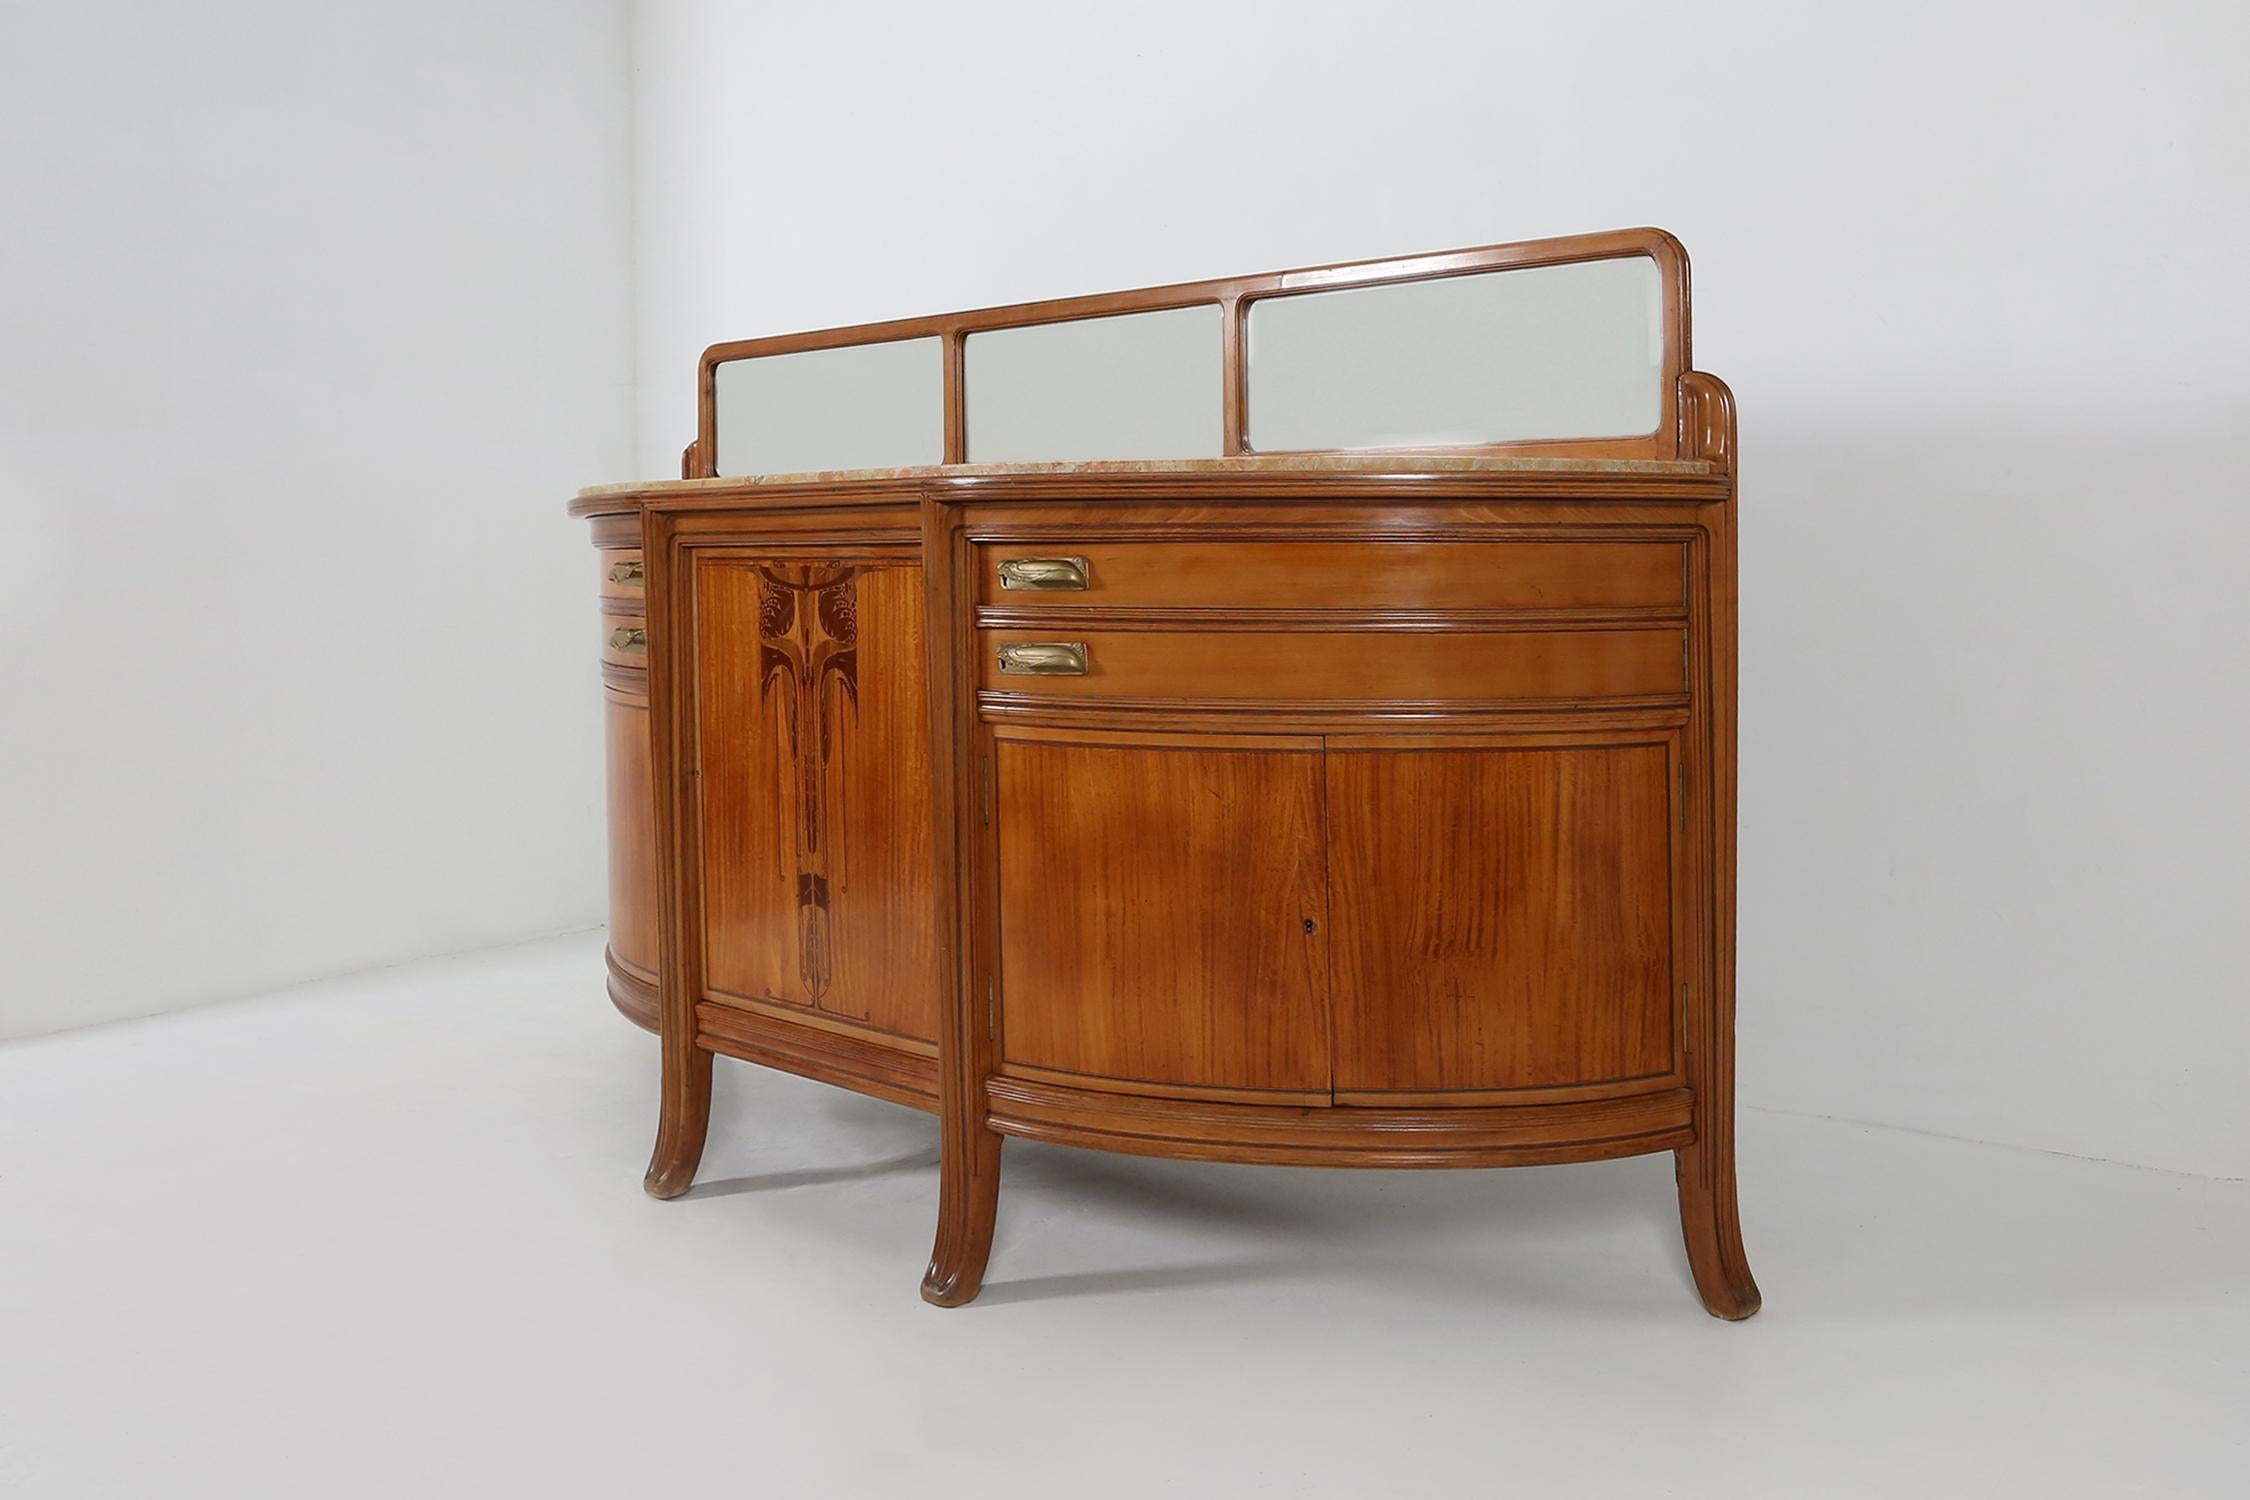 French Art Deco Sideboard by Maurice Dufrène 1911 For Sale